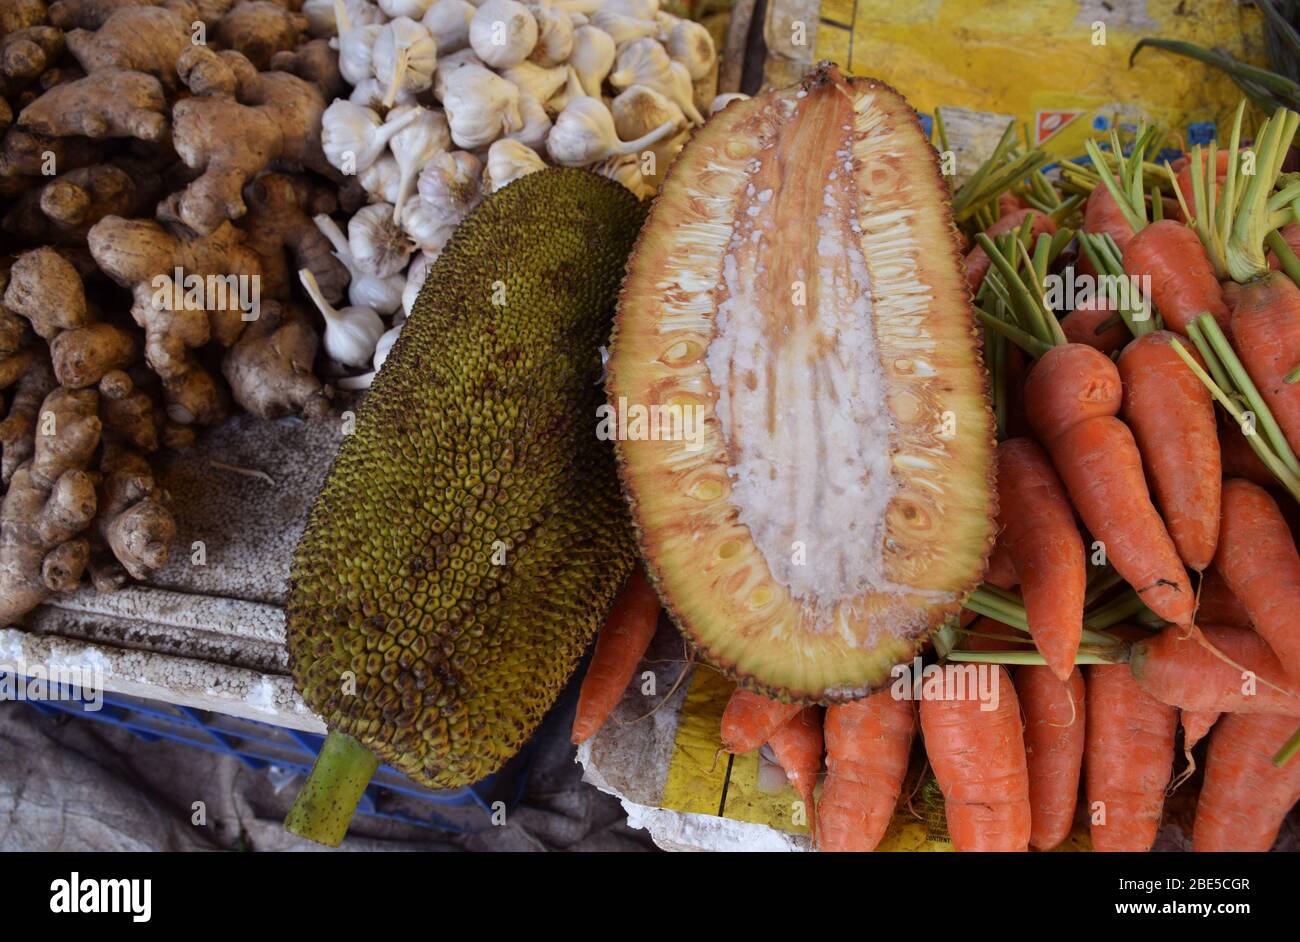 Indian Jackfruit or Kathal in an Indian vegetable market Stock Photo